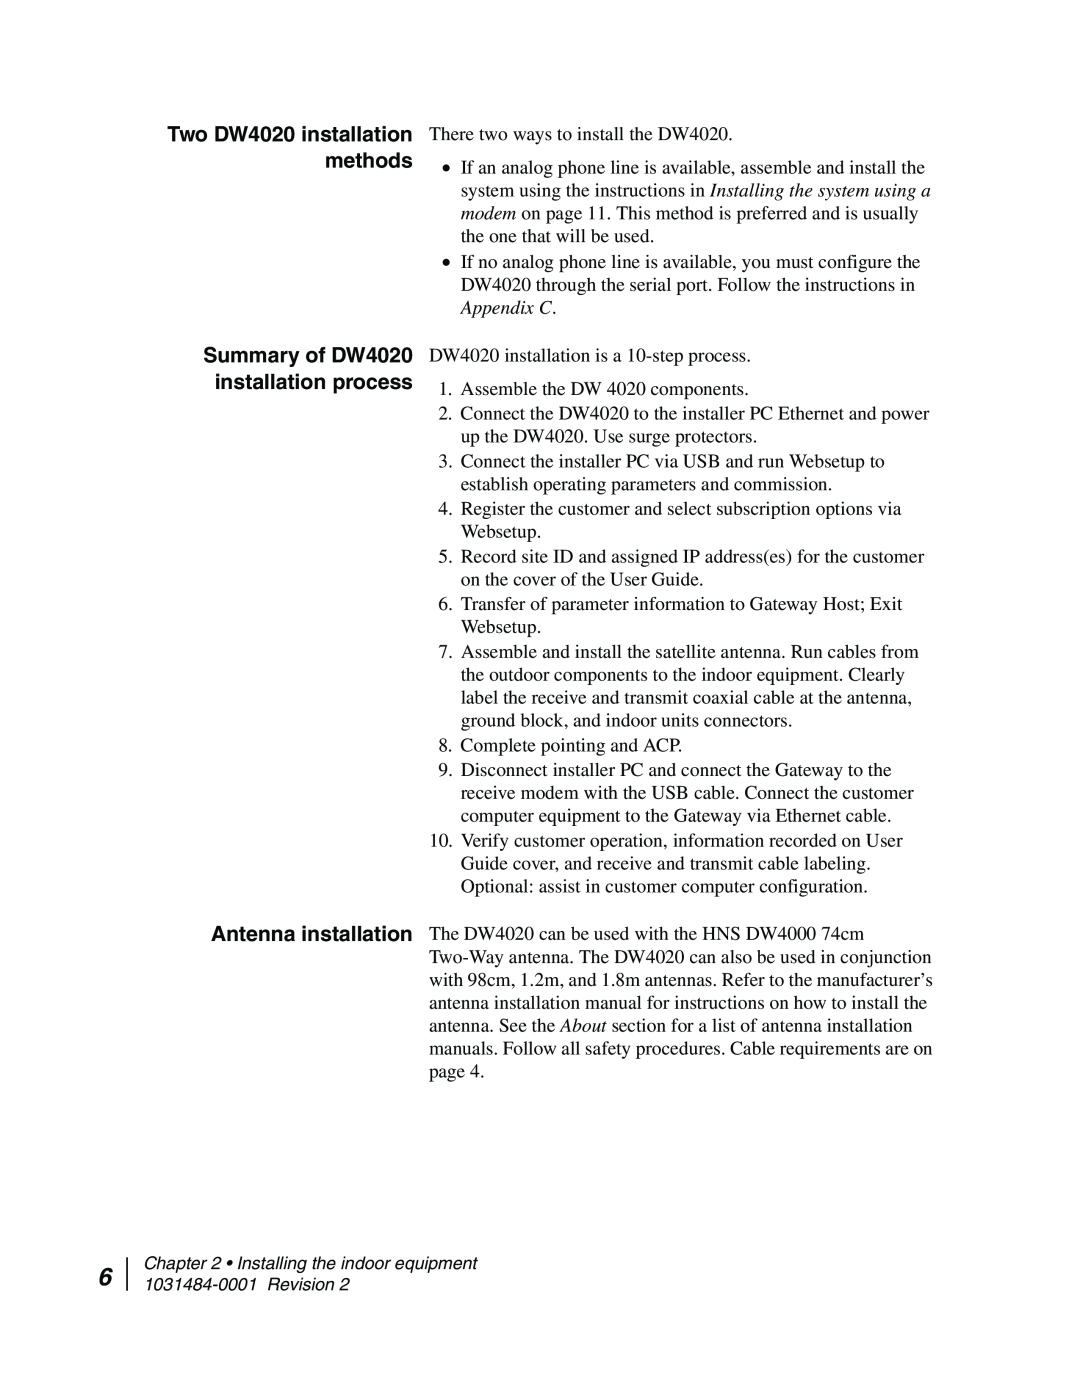 Hughes manual Summary of DW4020 installation process, Two DW4020 installation methods 